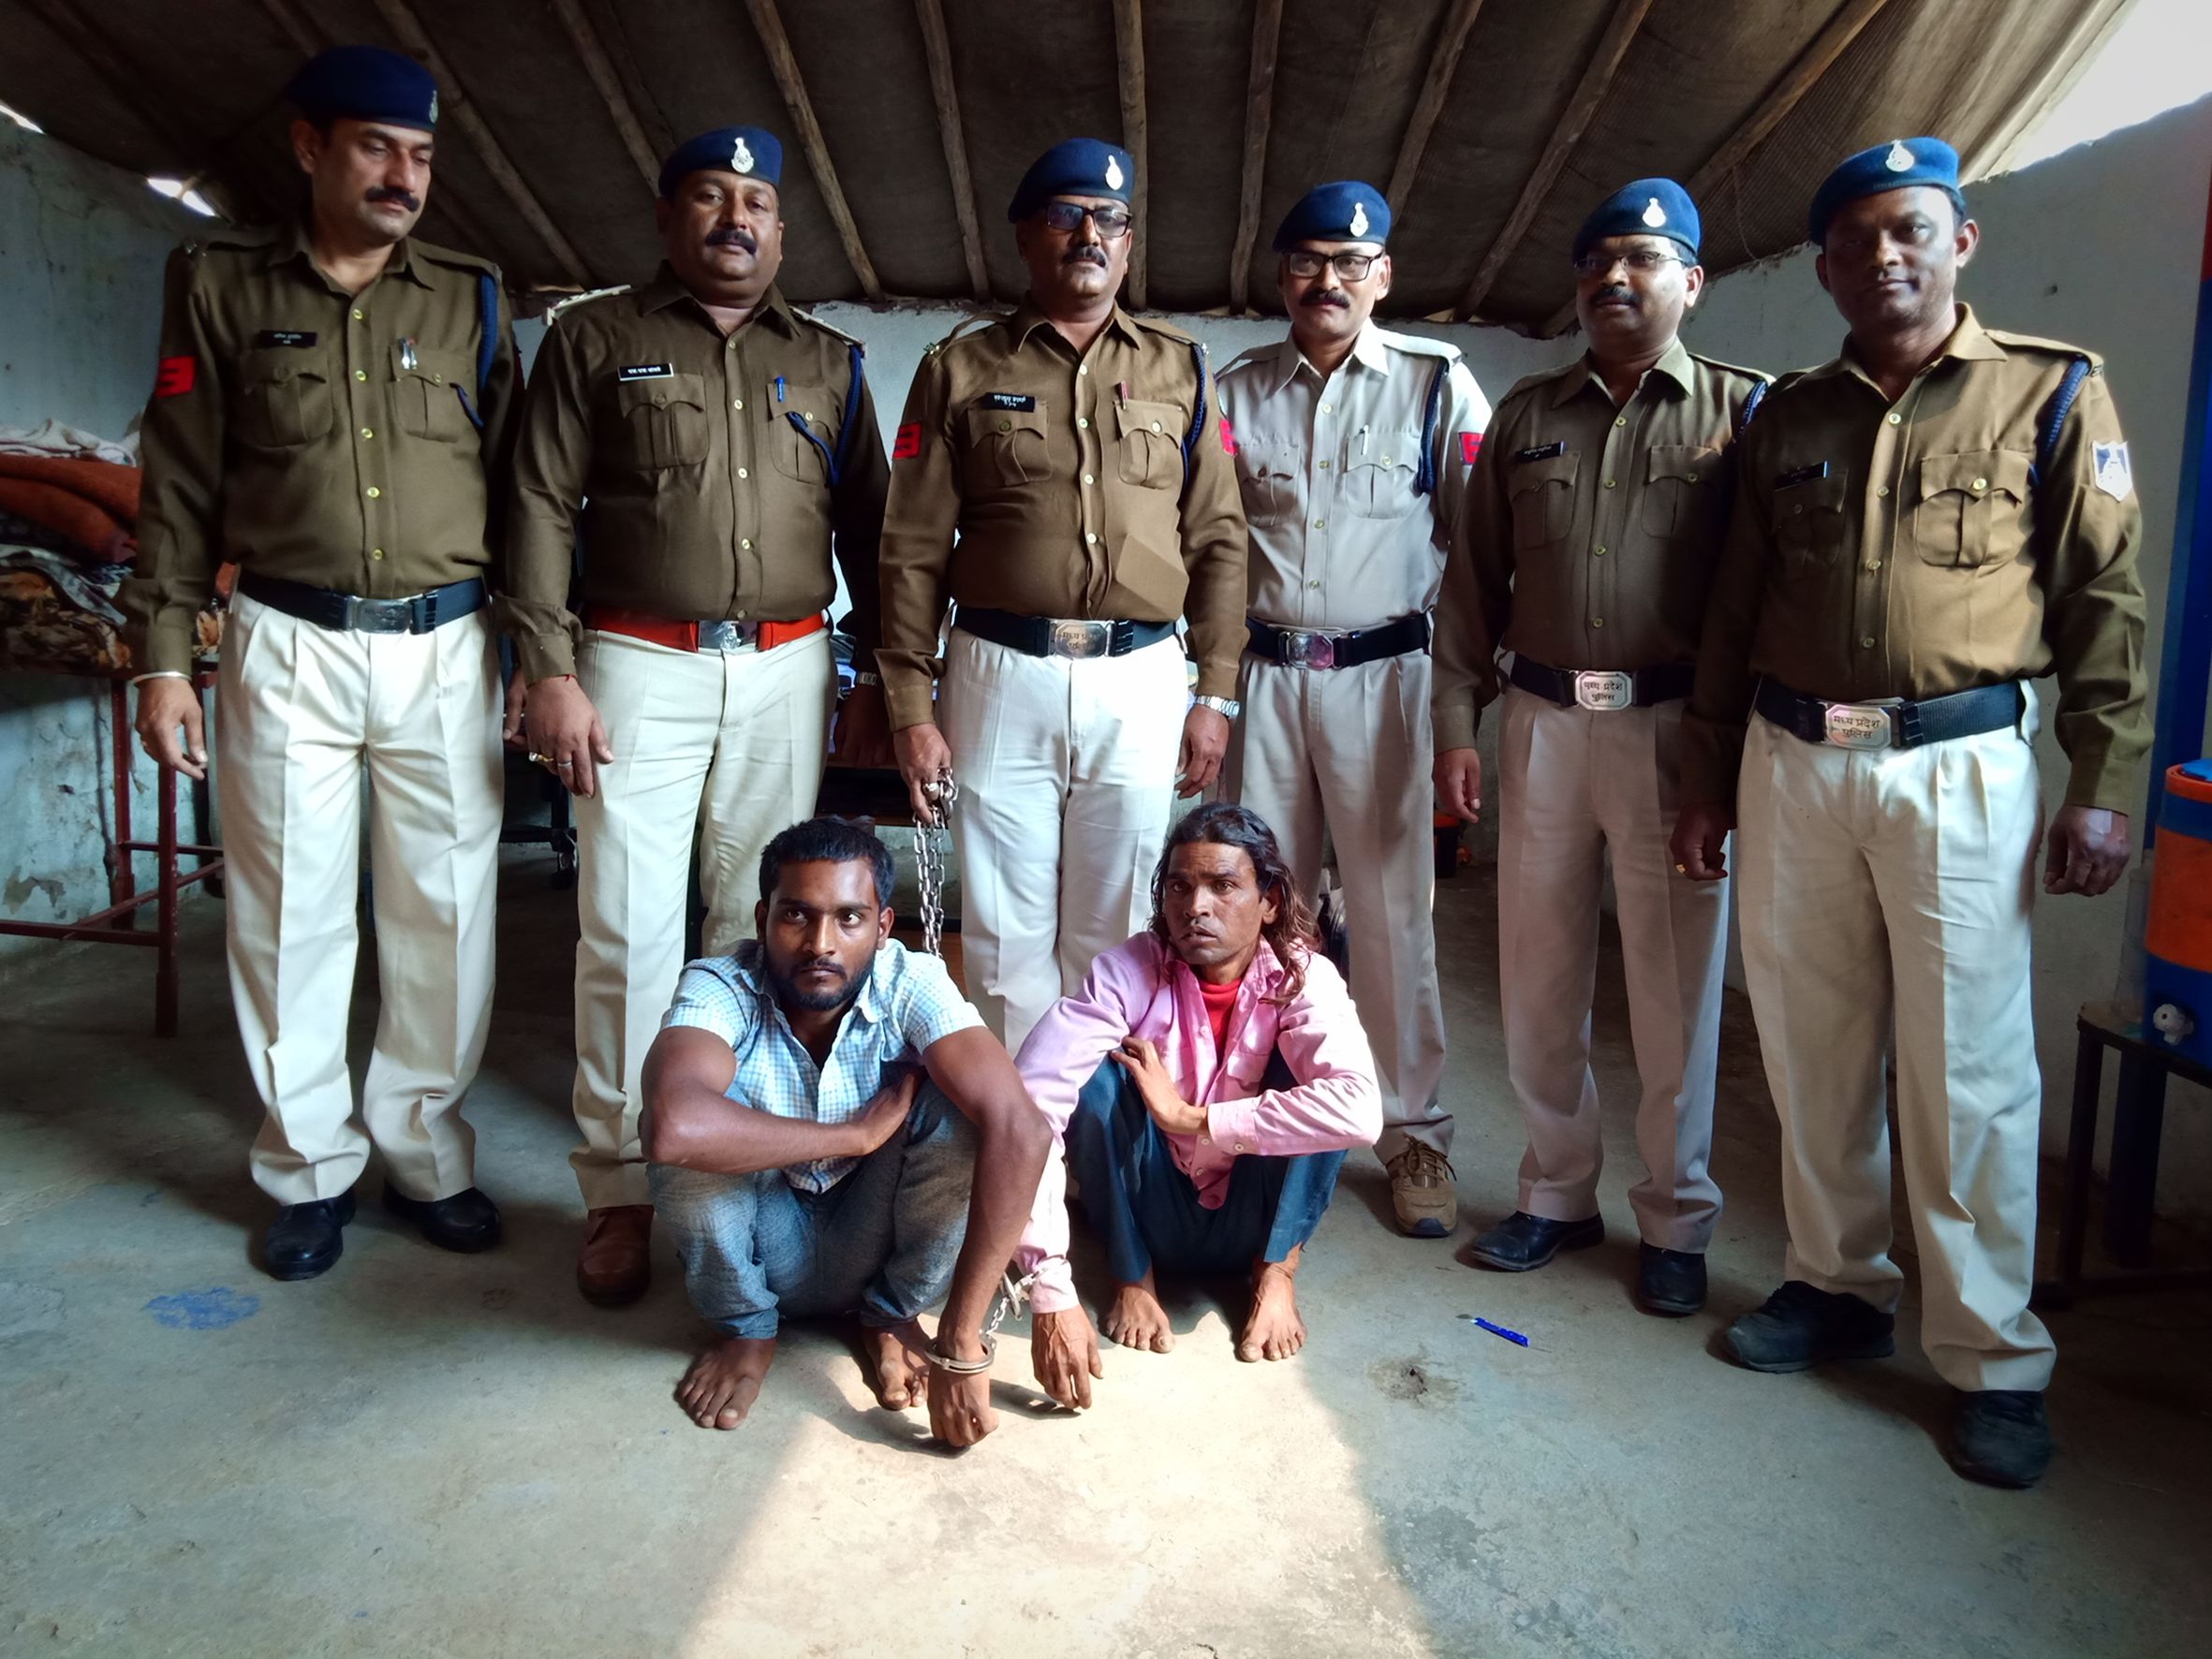 Take two people of Gwalior with illegal weapons